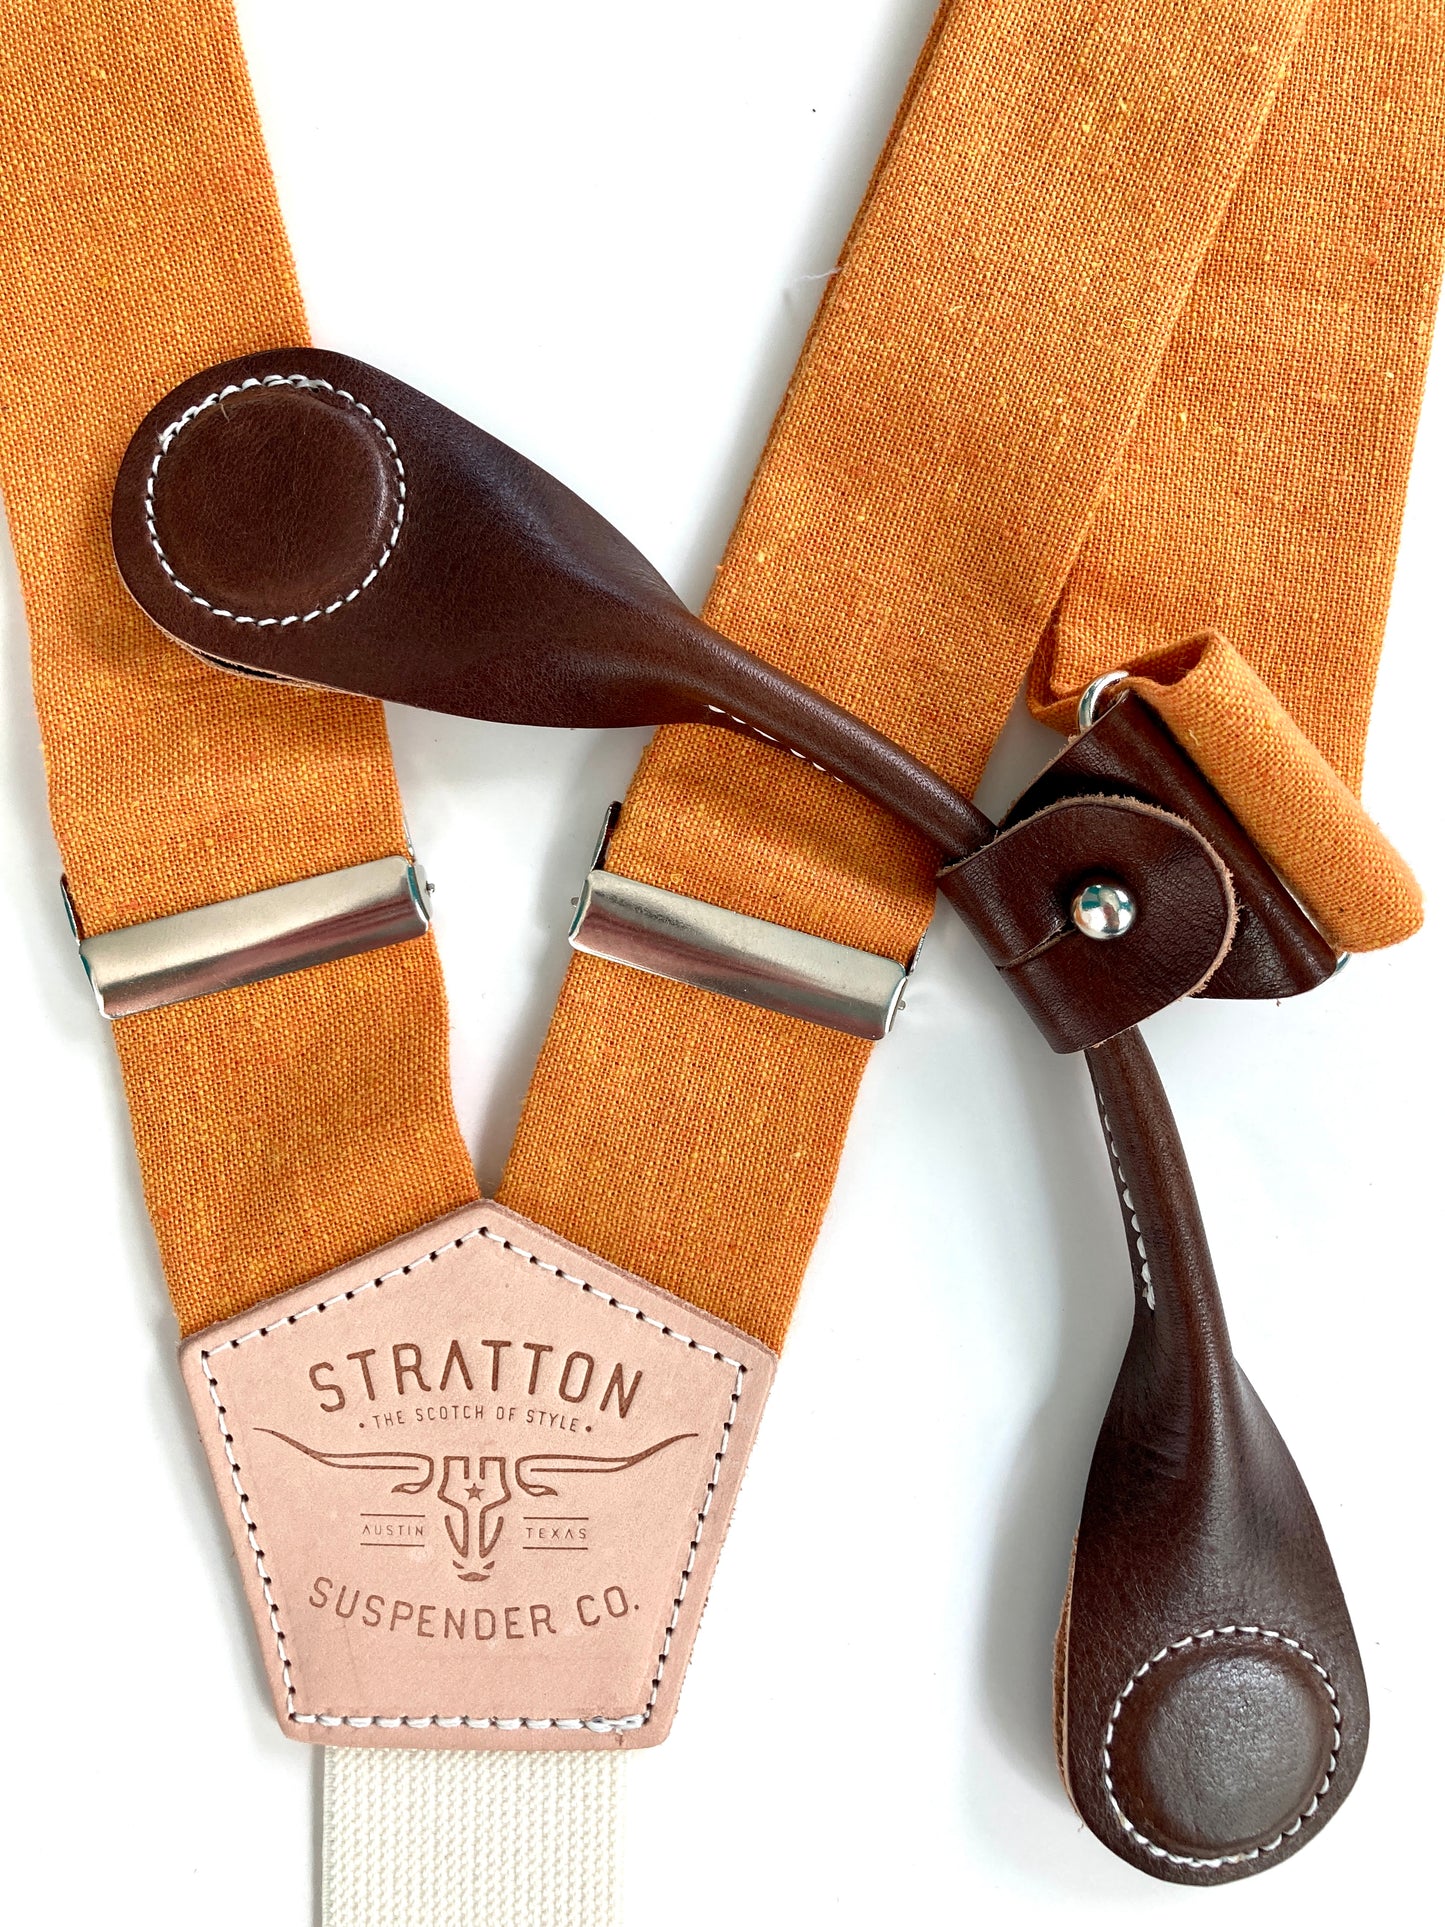 Stratton Suspender Co. features the orange linen suspenders on veg tan shoulder leather with cream colored elastic back strap for the Fall 2022 suspenders collection Magnetic Stratton Suspender clasps in Chocolate Pontedero Italian leather hand-picked by Stratton Suspender Co.